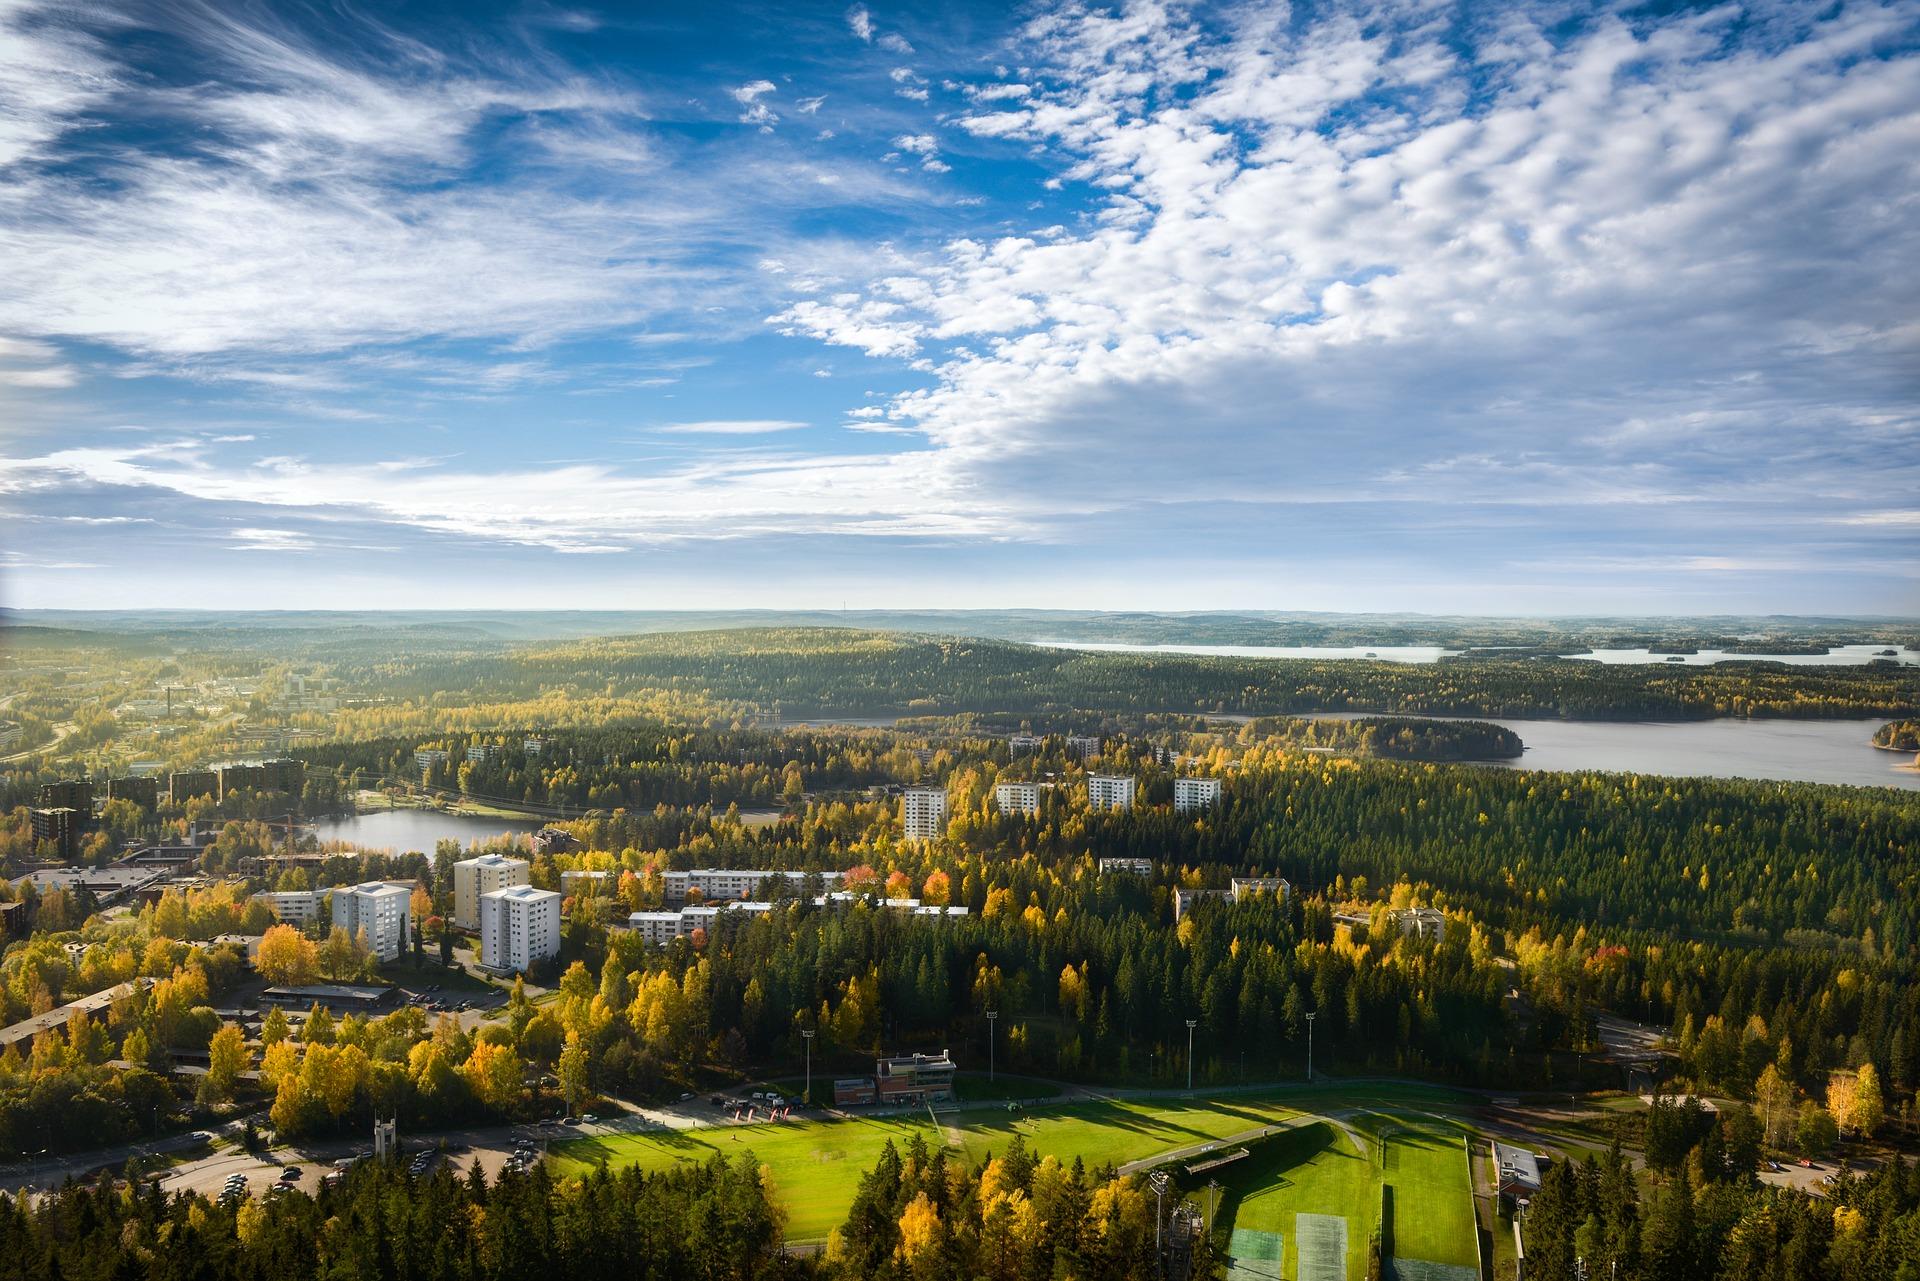 Aerial view of countryside in Kuopio in sunny weather with few clouds